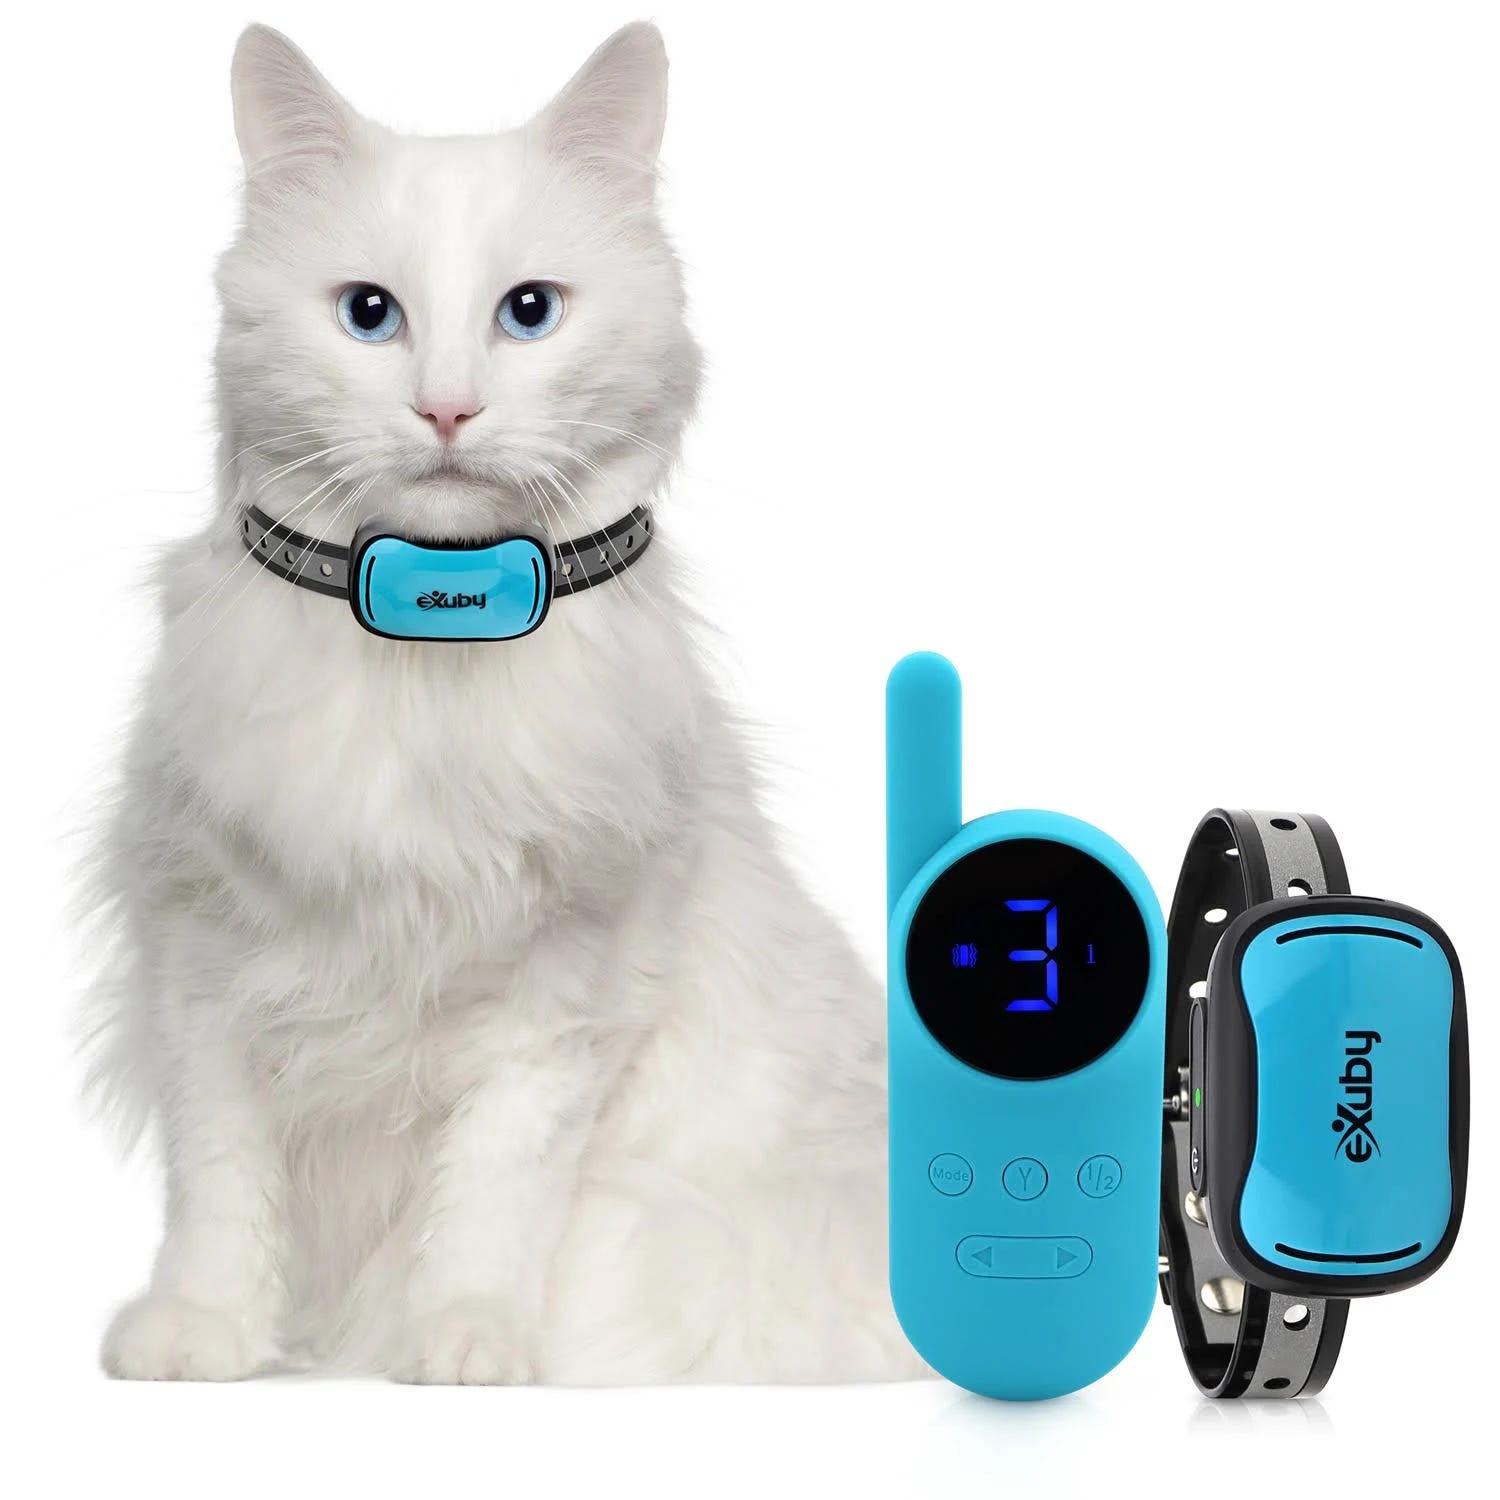 Exuby Cat Shock Collar with Remote - Intelligent Training Solution | Image